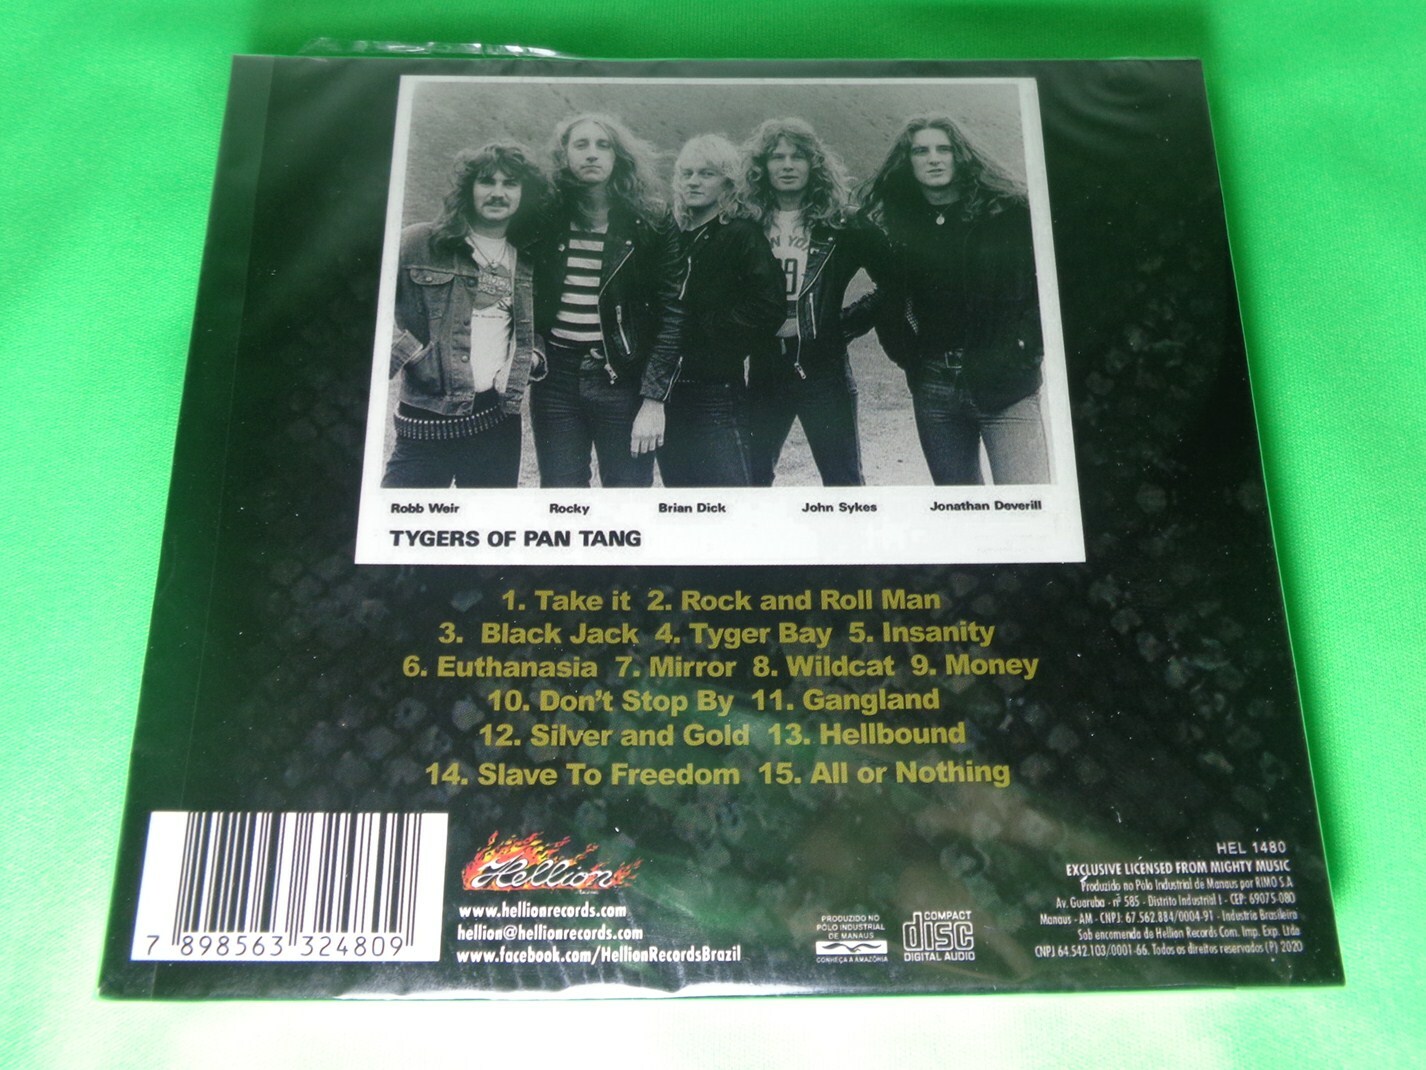 CD - Tygers of Pan Tang - Hellbound Spellbound Live 1981 (Slipcase)